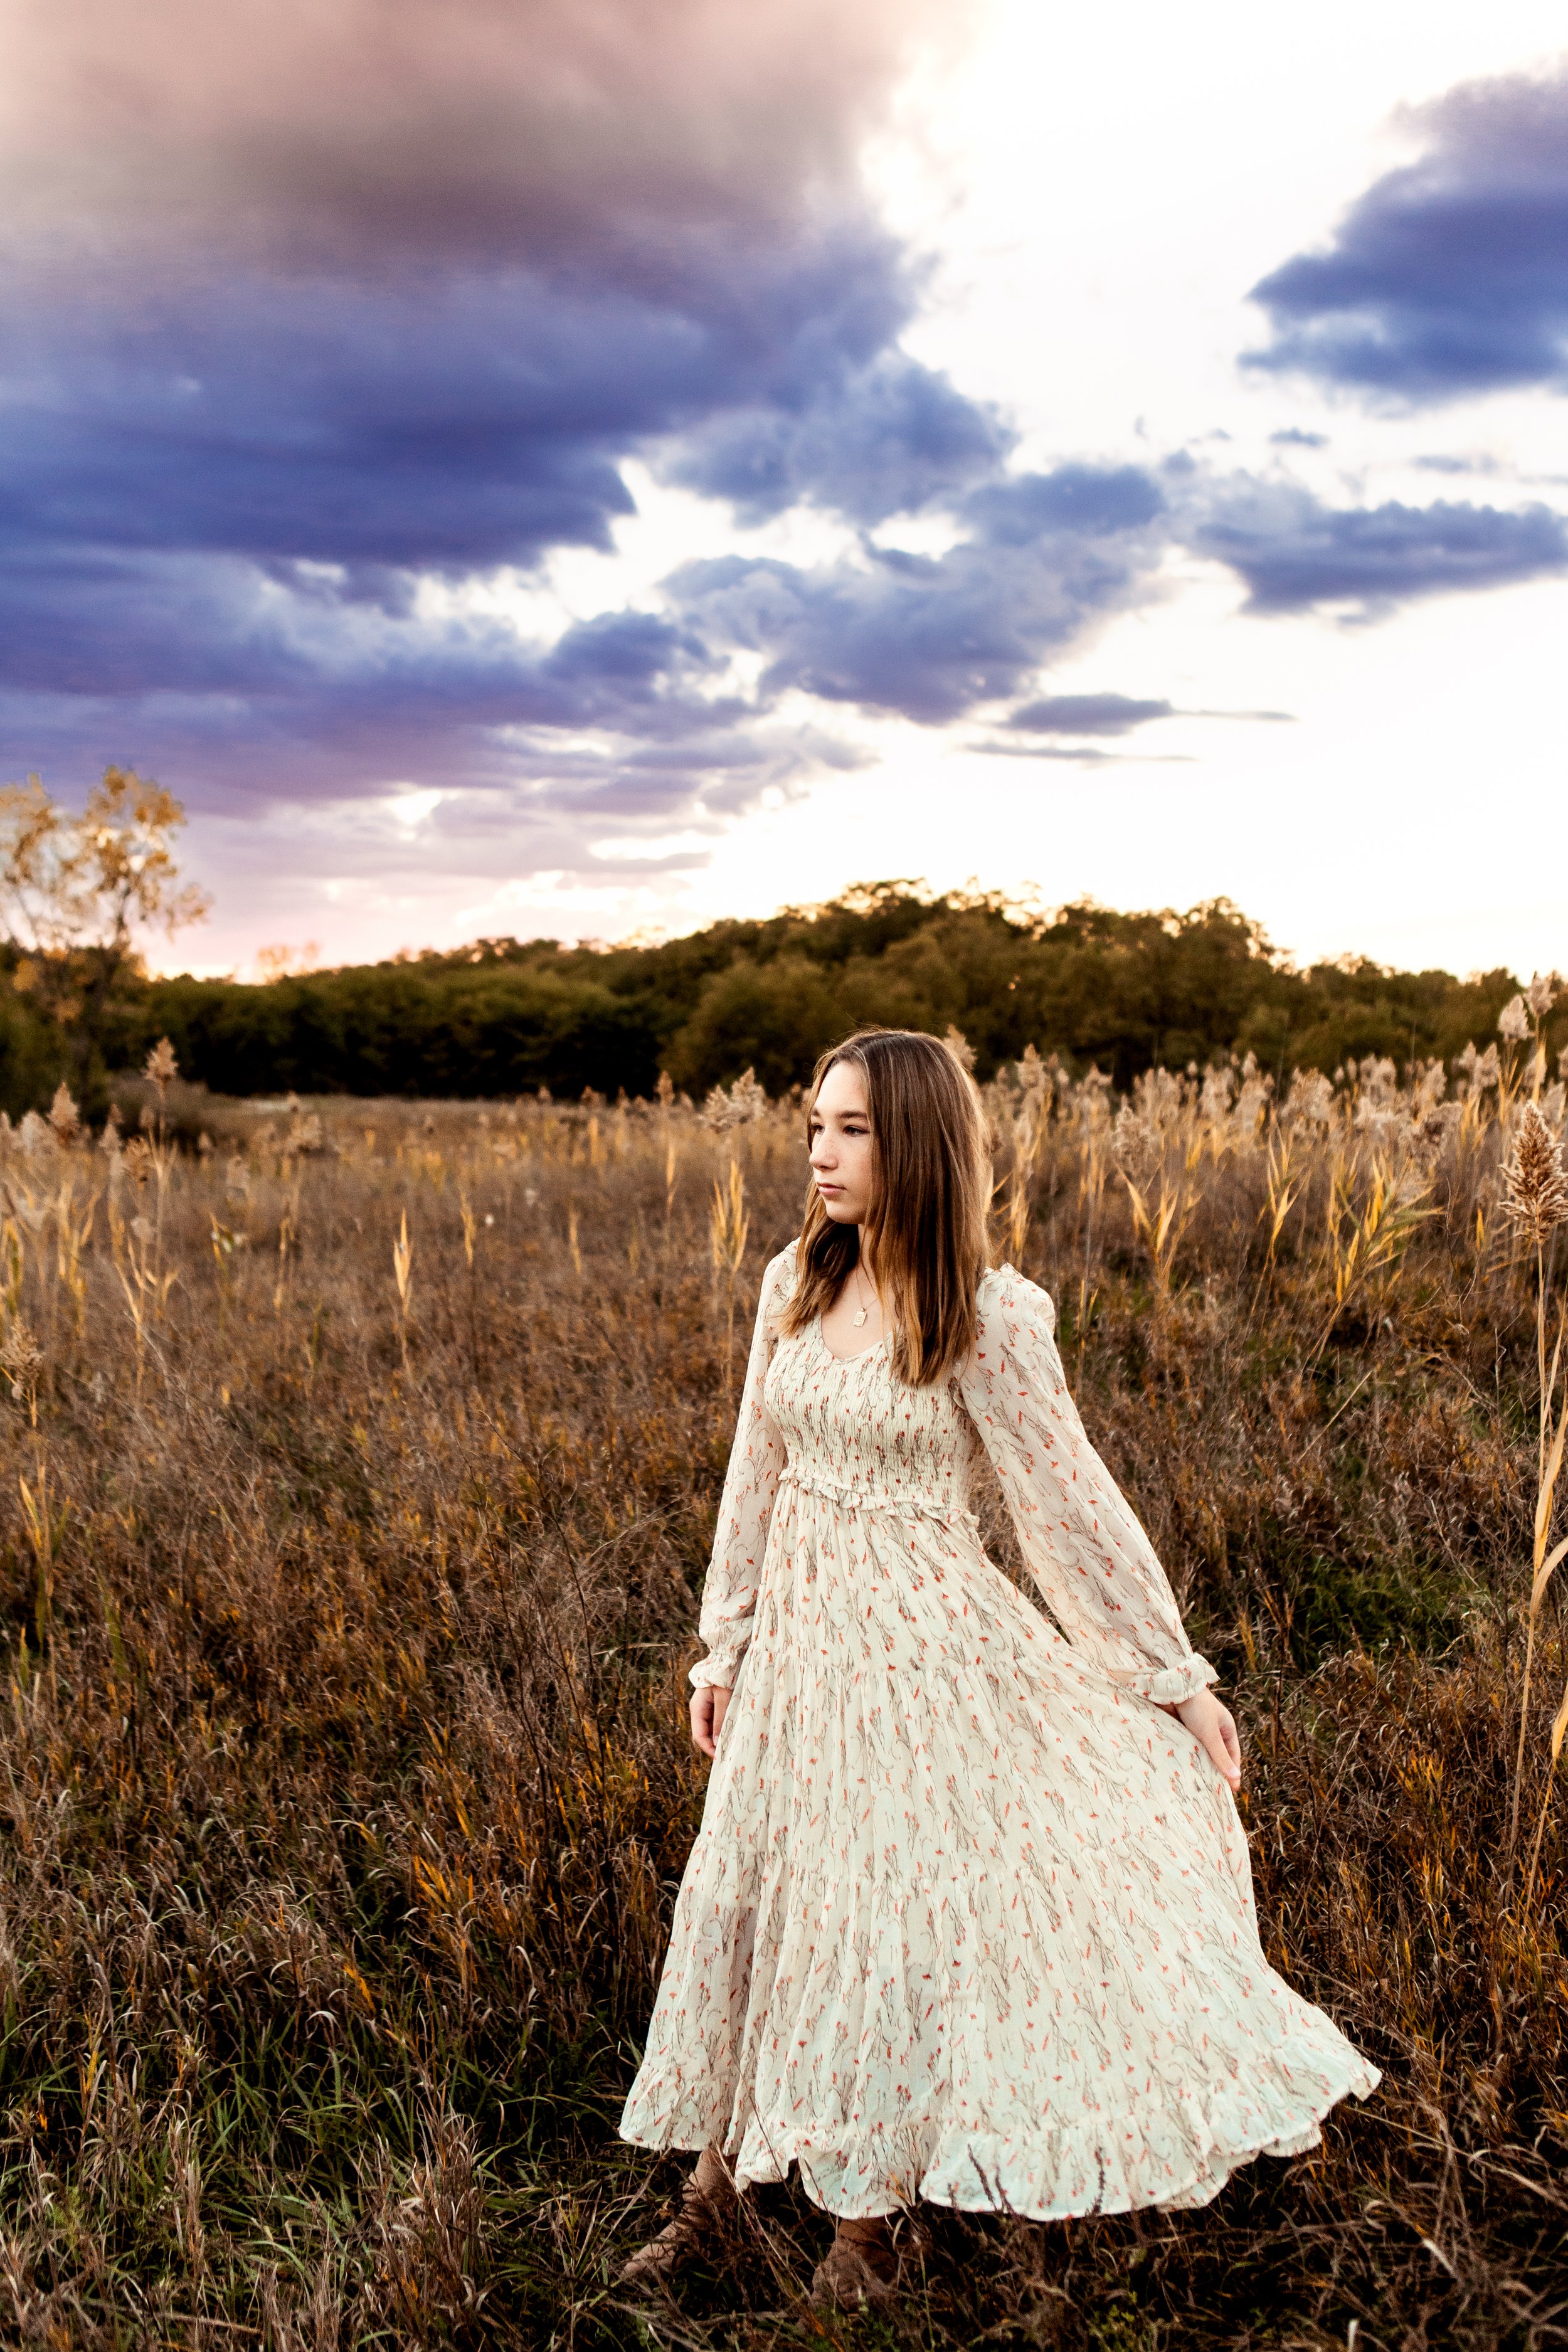  Teala Ward Photography captures a teenage girl twirling in a field at sunset with a stunning sky. teenage girl outfits #TealaWardPhotography #TealaWardFamilies #photographers #IllinoisPhotographer #ILphotographers #IllinoisValleyFamilies 